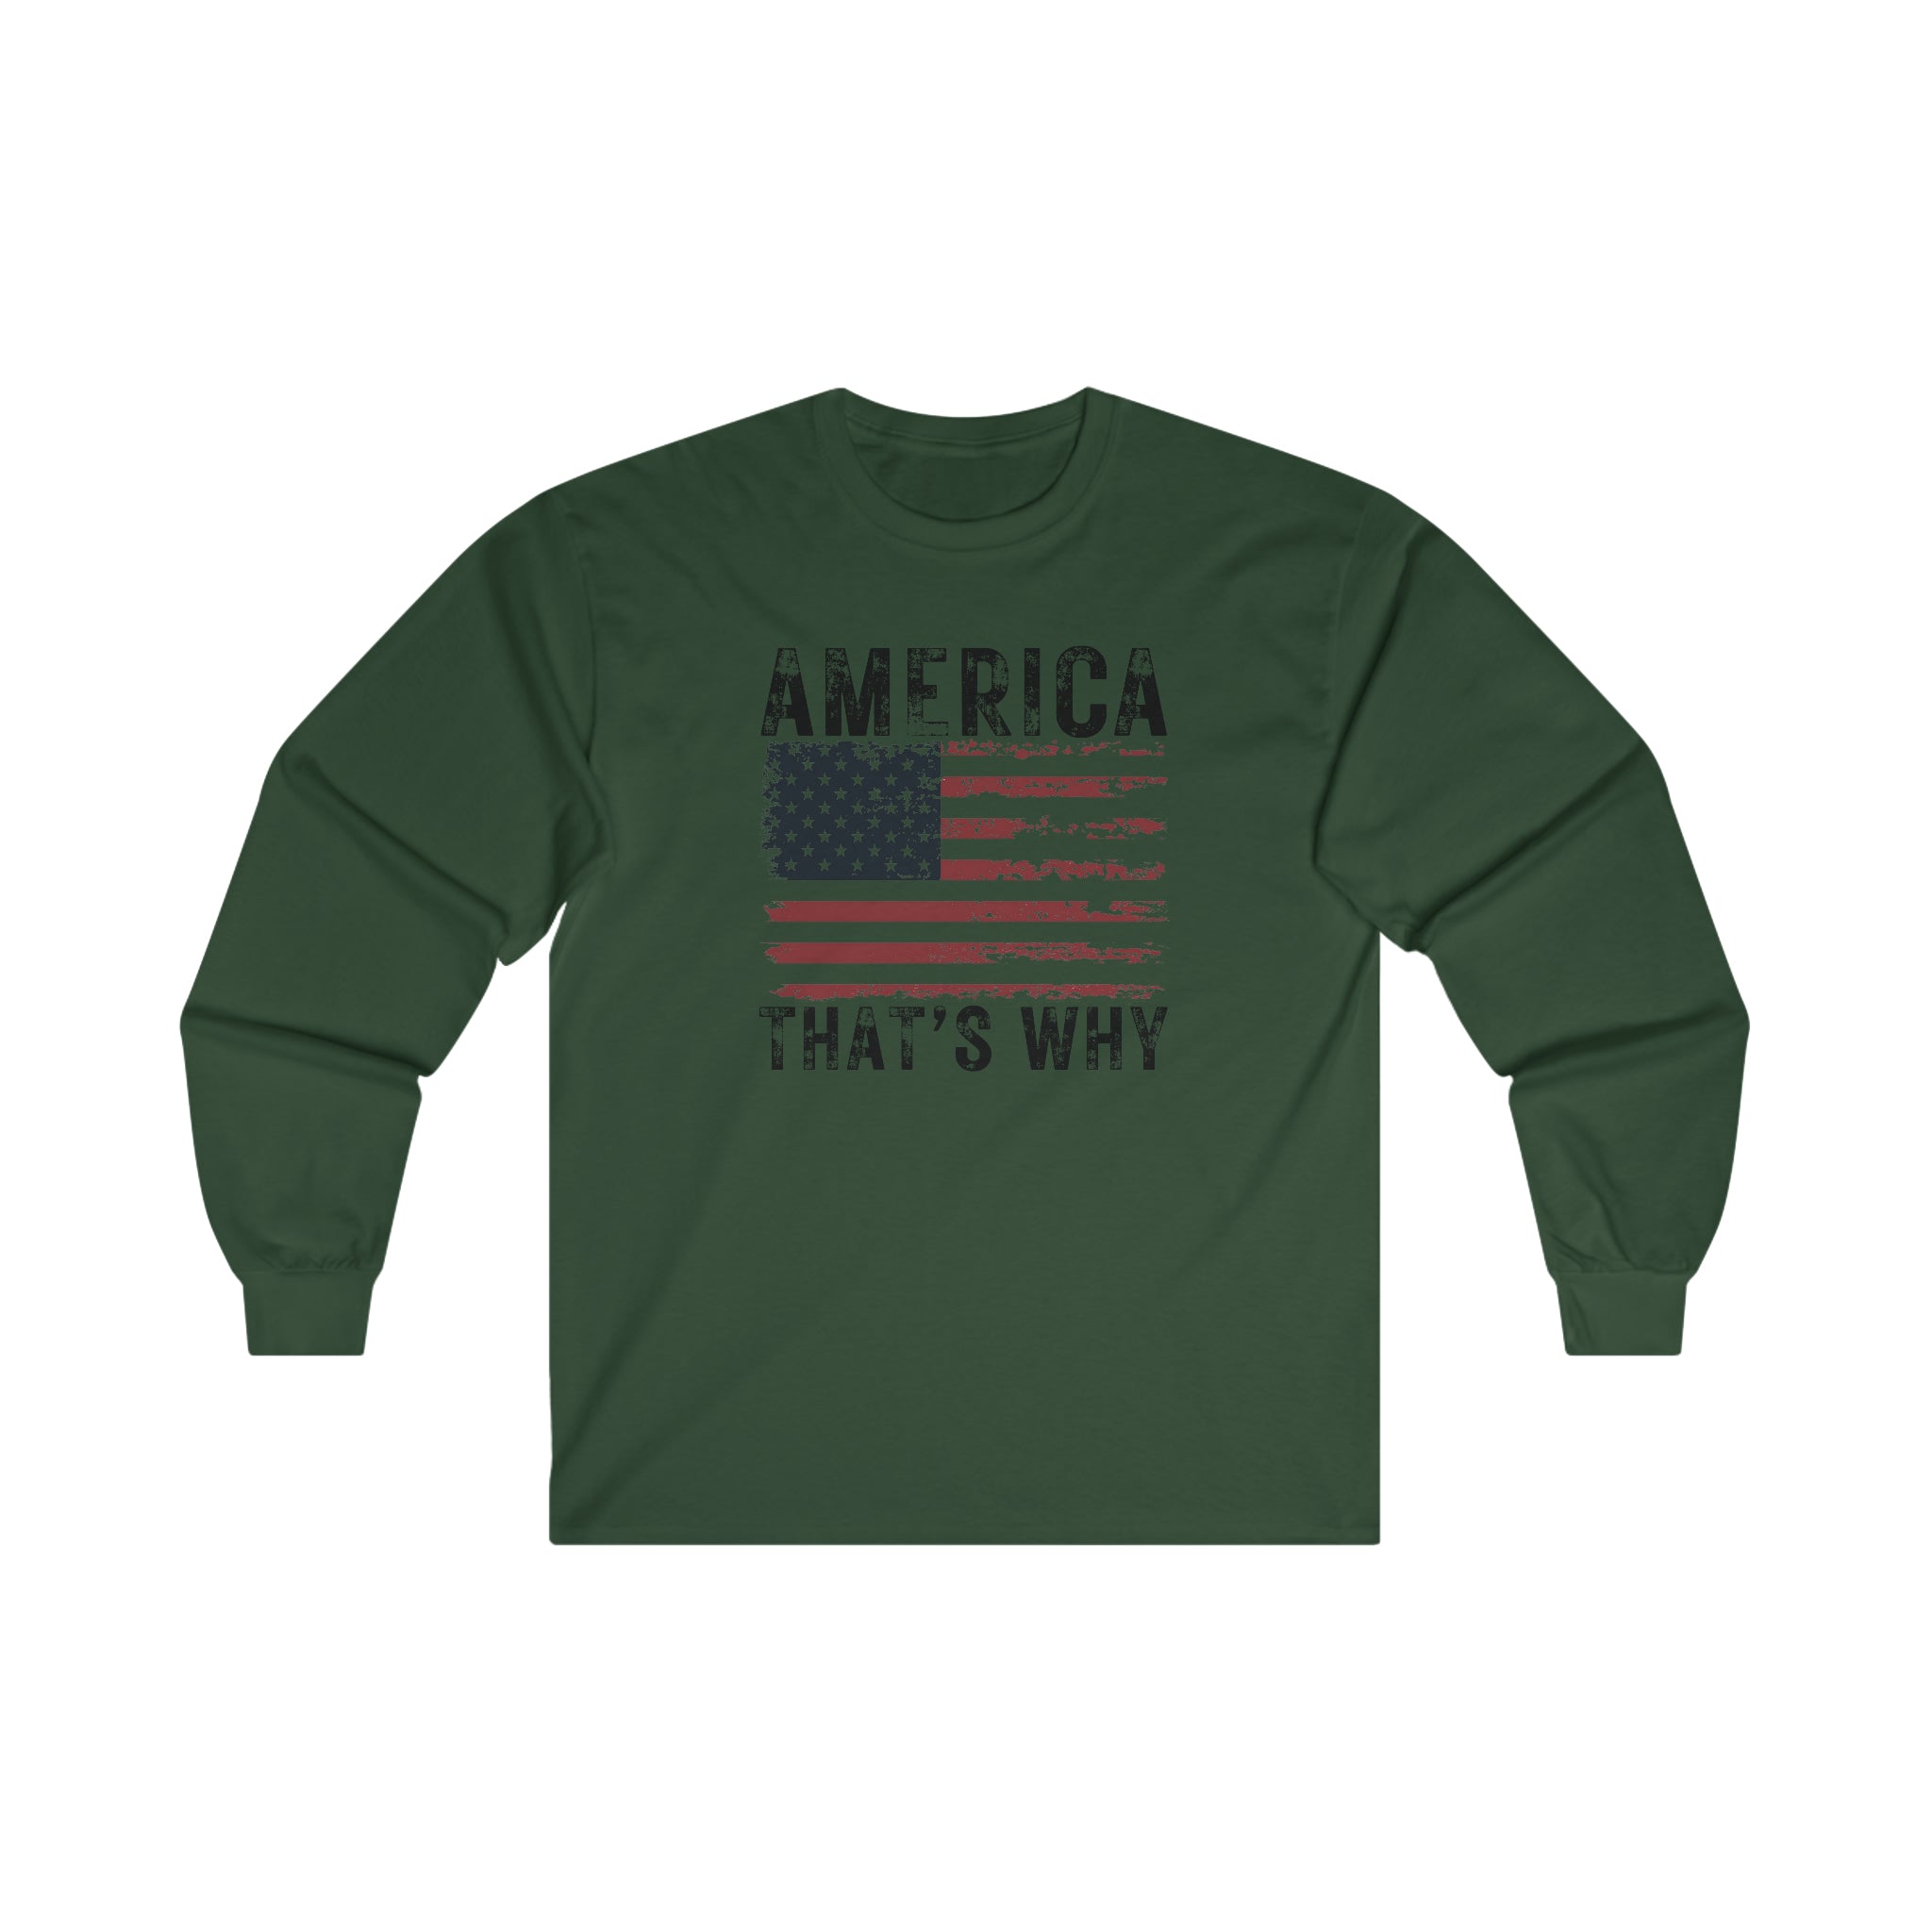 America That's Why Long-Sleeve T-Shirt